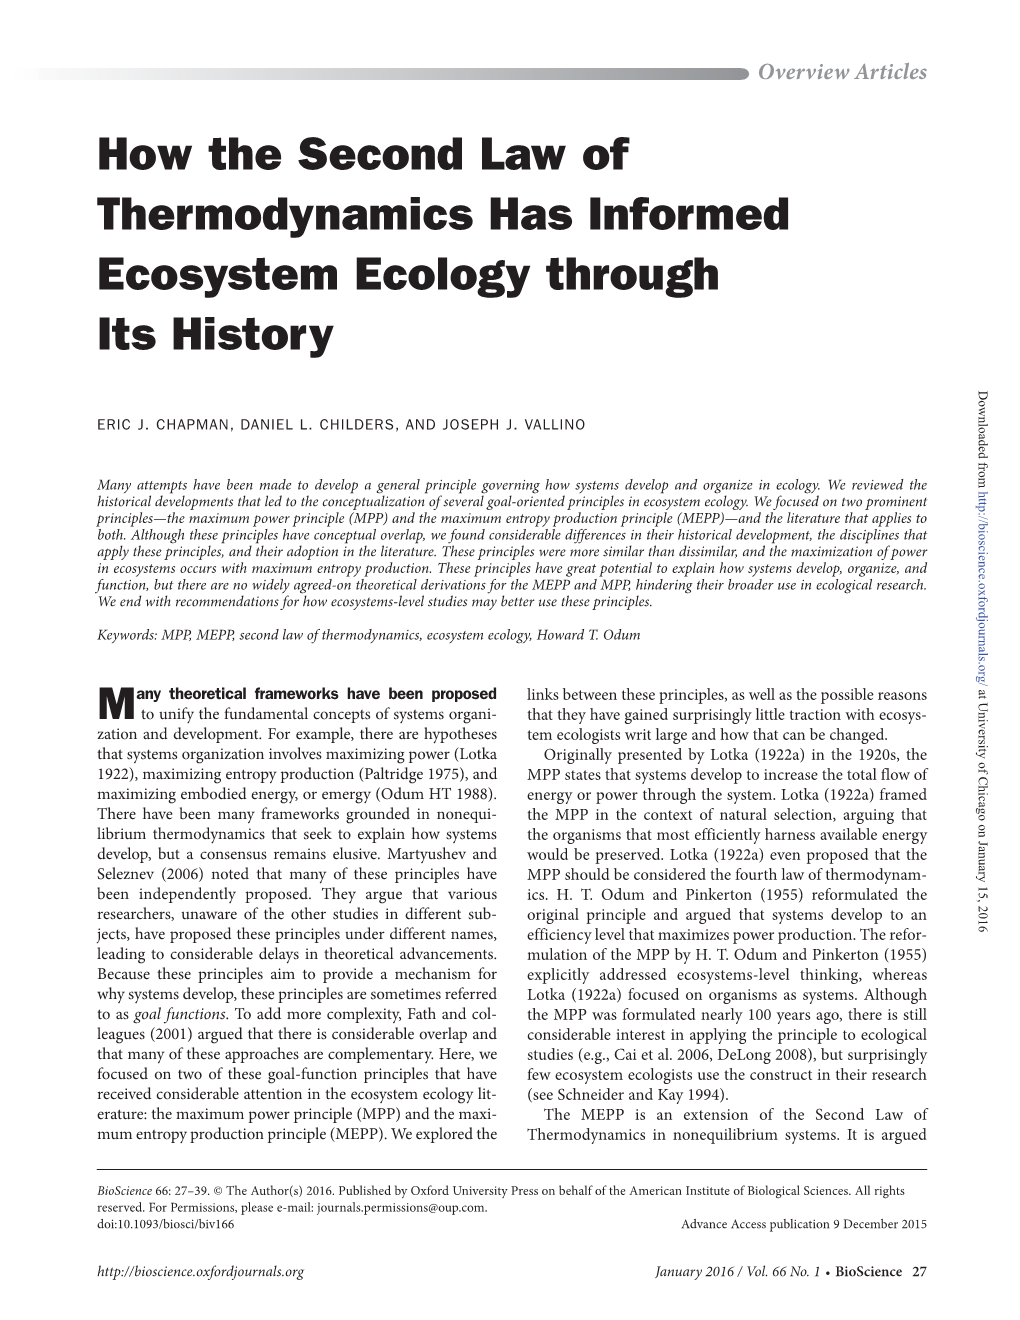 How the Second Law of Thermodynamics Has Informed Ecosystem Ecology Through Its History Downloaded From